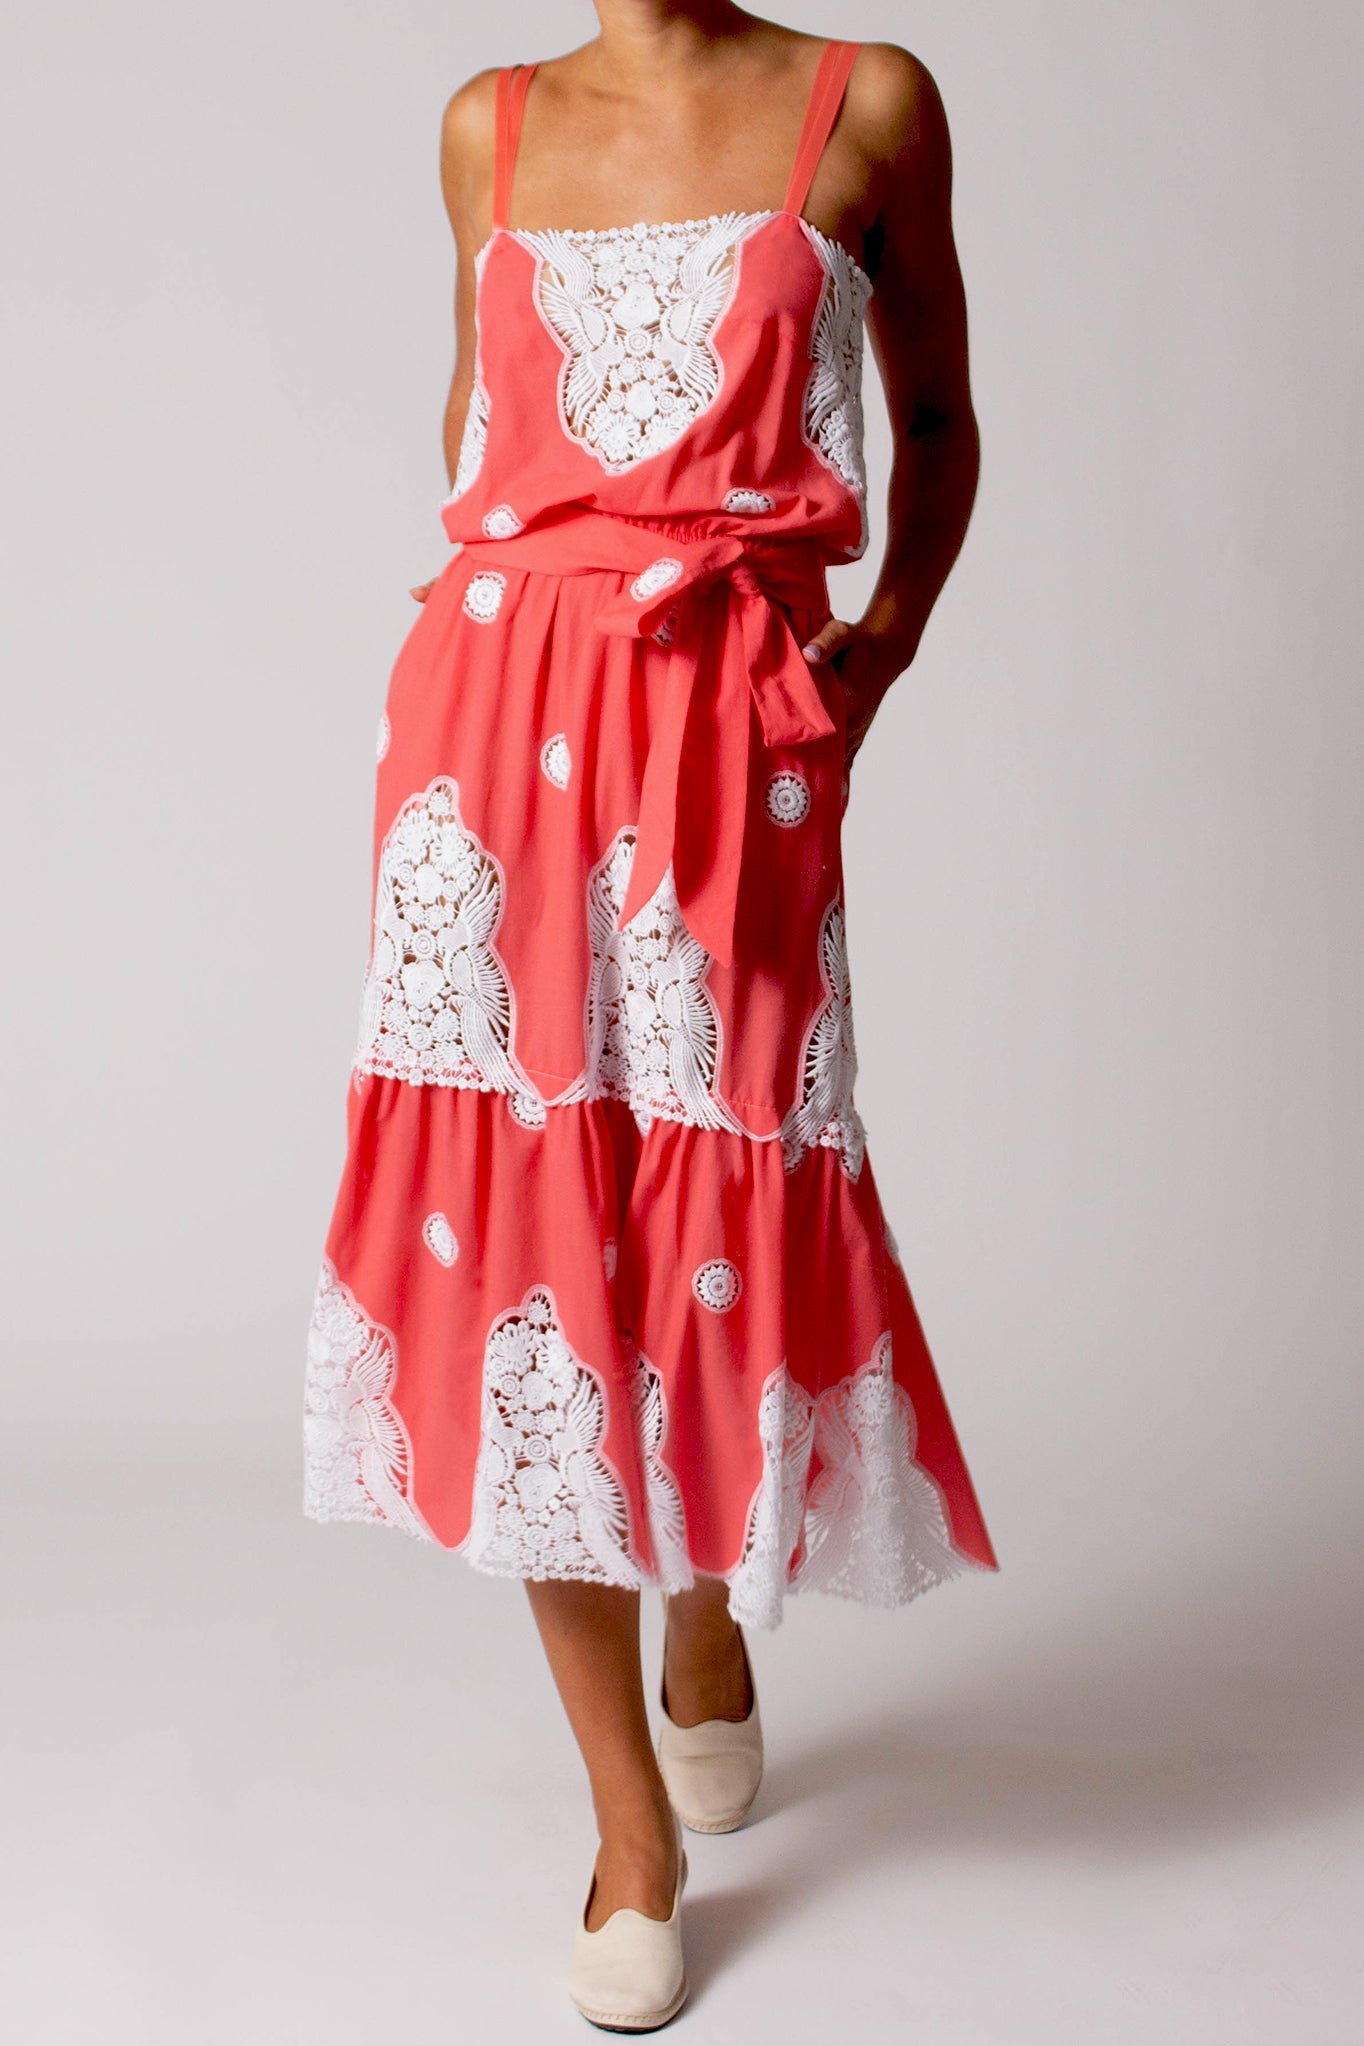 Esme Falcon Cotton Embroidered Dress - Watermelon by Miguelina